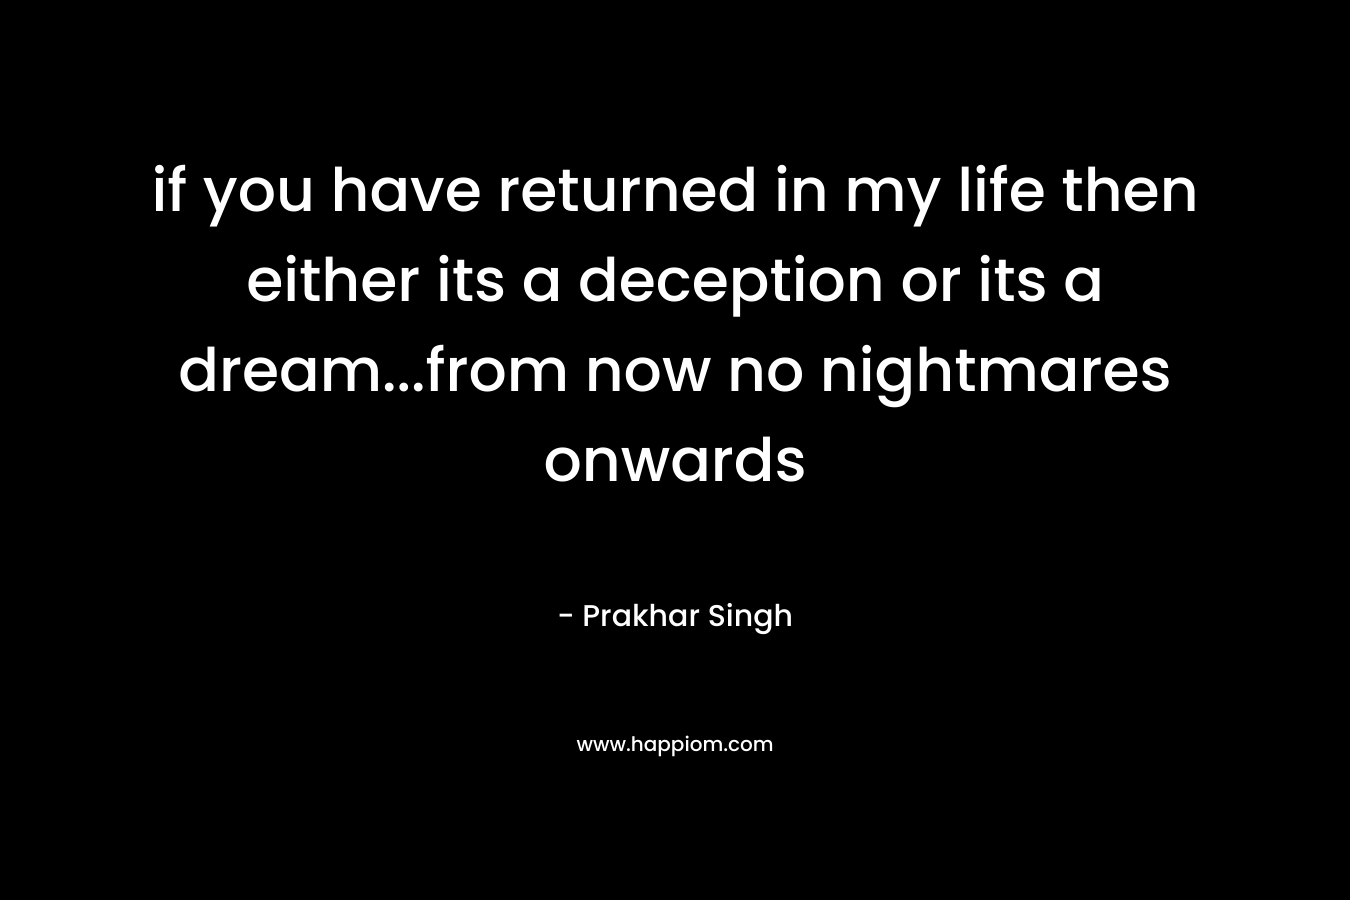 if you have returned in my life then either its a deception or its a dream...from now no nightmares onwards